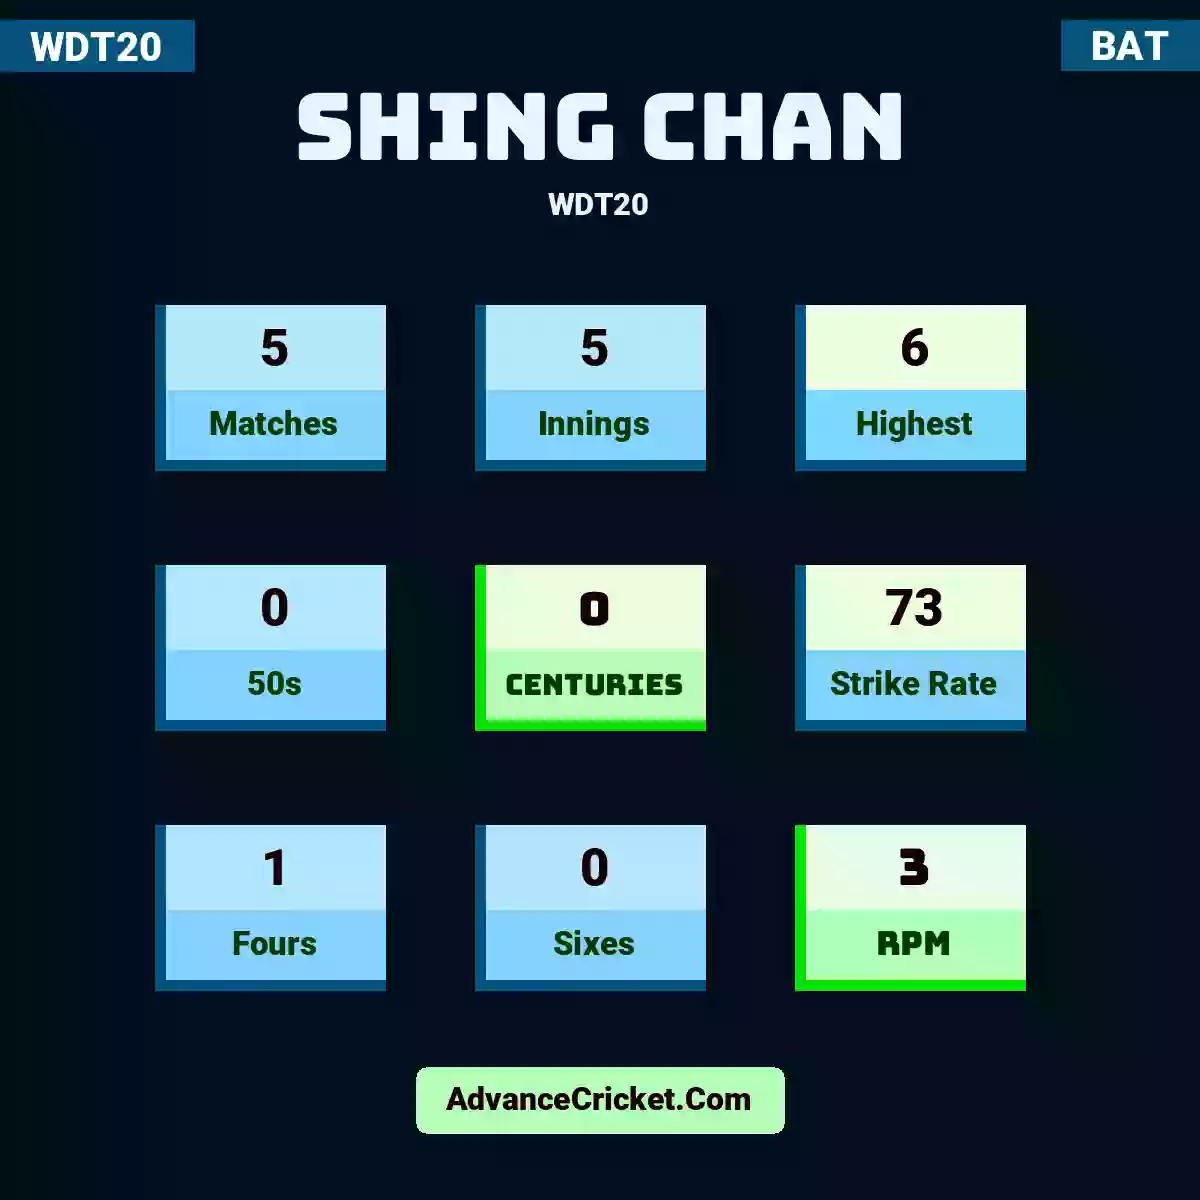 Shing Chan WDT20 , Shing Chan played 5 matches, scored 6 runs as highest, 0 half-centuries, and 0 centuries, with a strike rate of 73. S.Chan hit 1 fours and 0 sixes, with an RPM of 3.